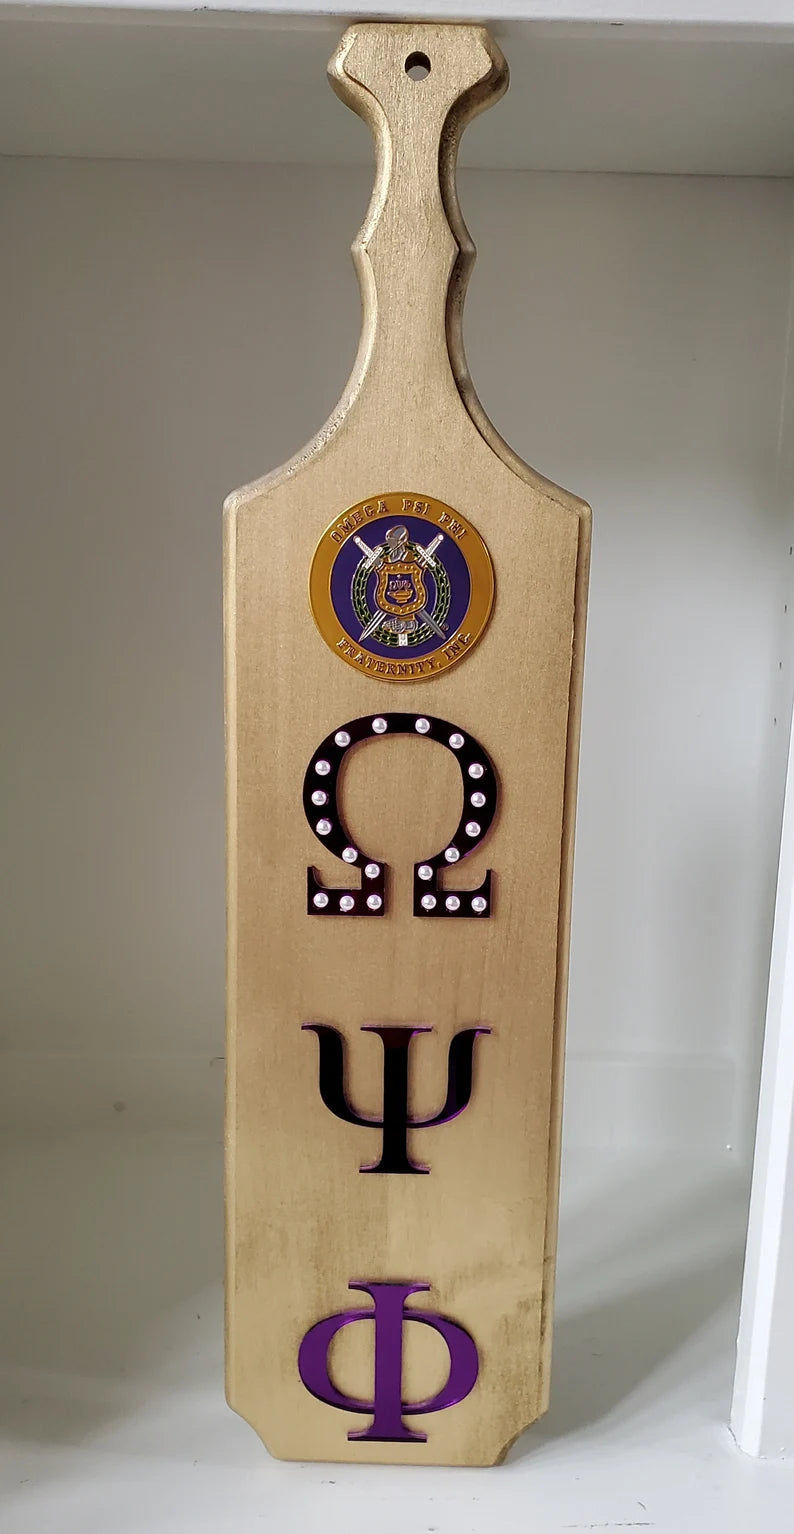 Omega Psi Phi ΩΨΦ Mirrored Letters Wooden Desk Ornament – Betty's